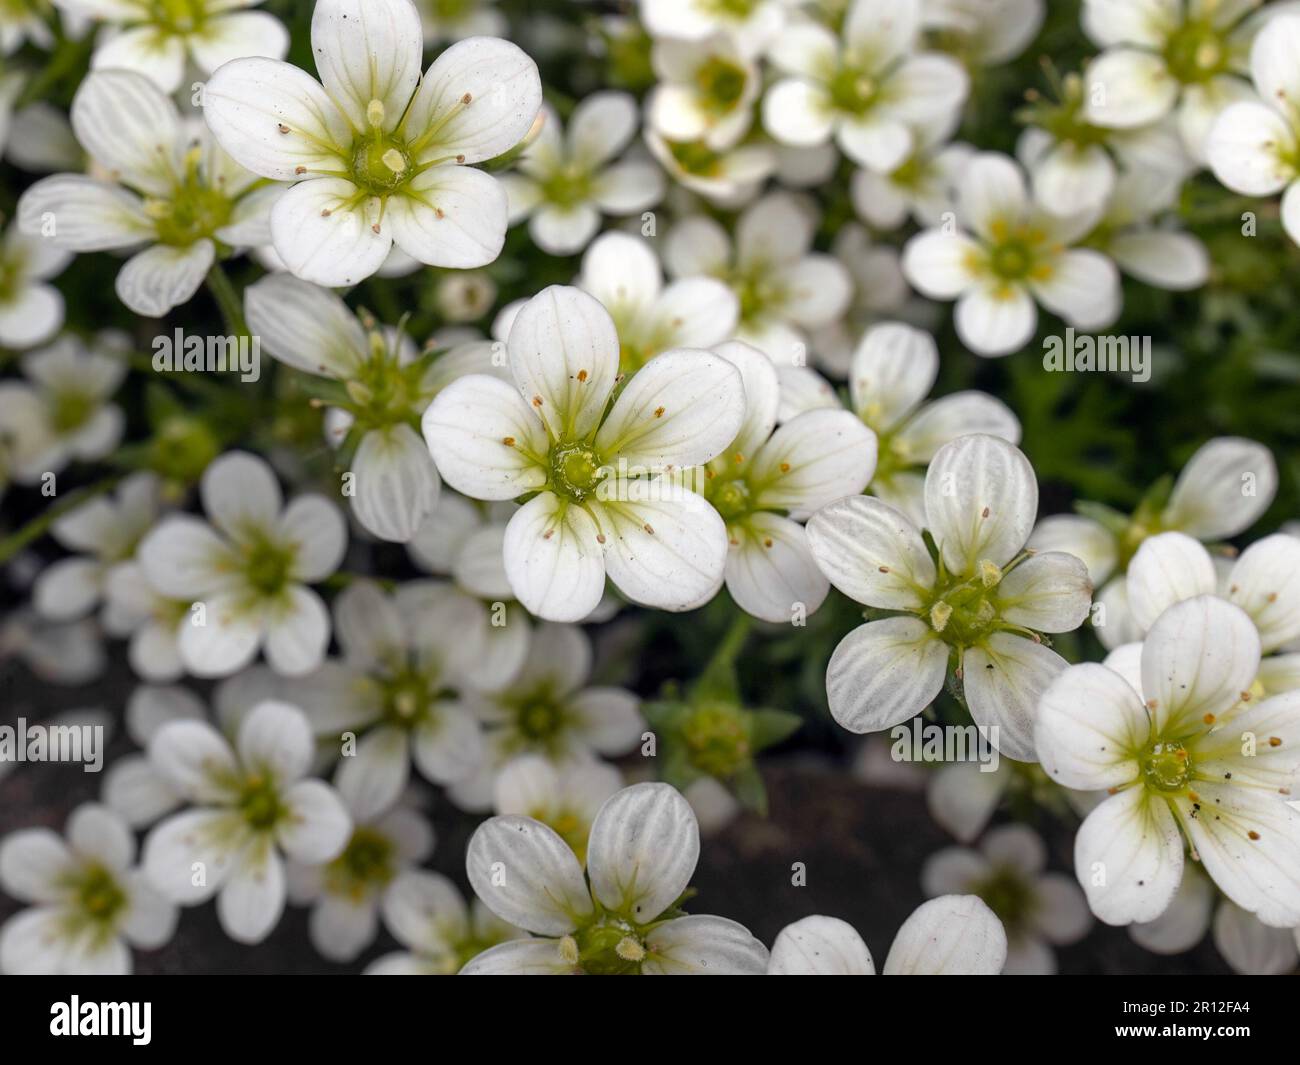 Closeup of multiple flowers of Saxifraga x arendsii ‘Touran White’ in a garden in Spring Stock Photo